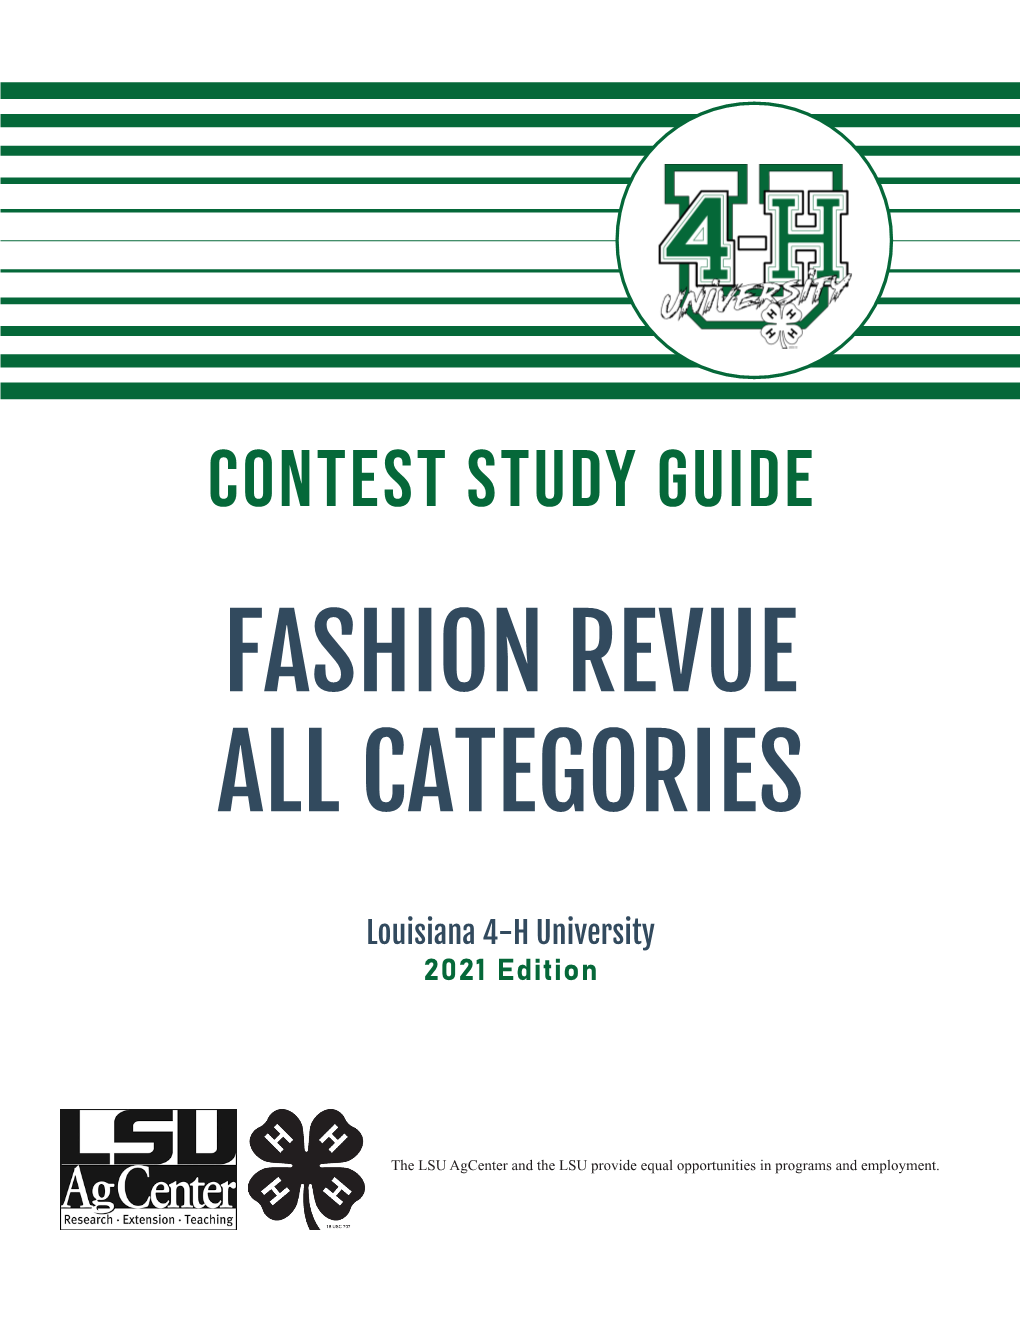 Fashion Revue All Categories